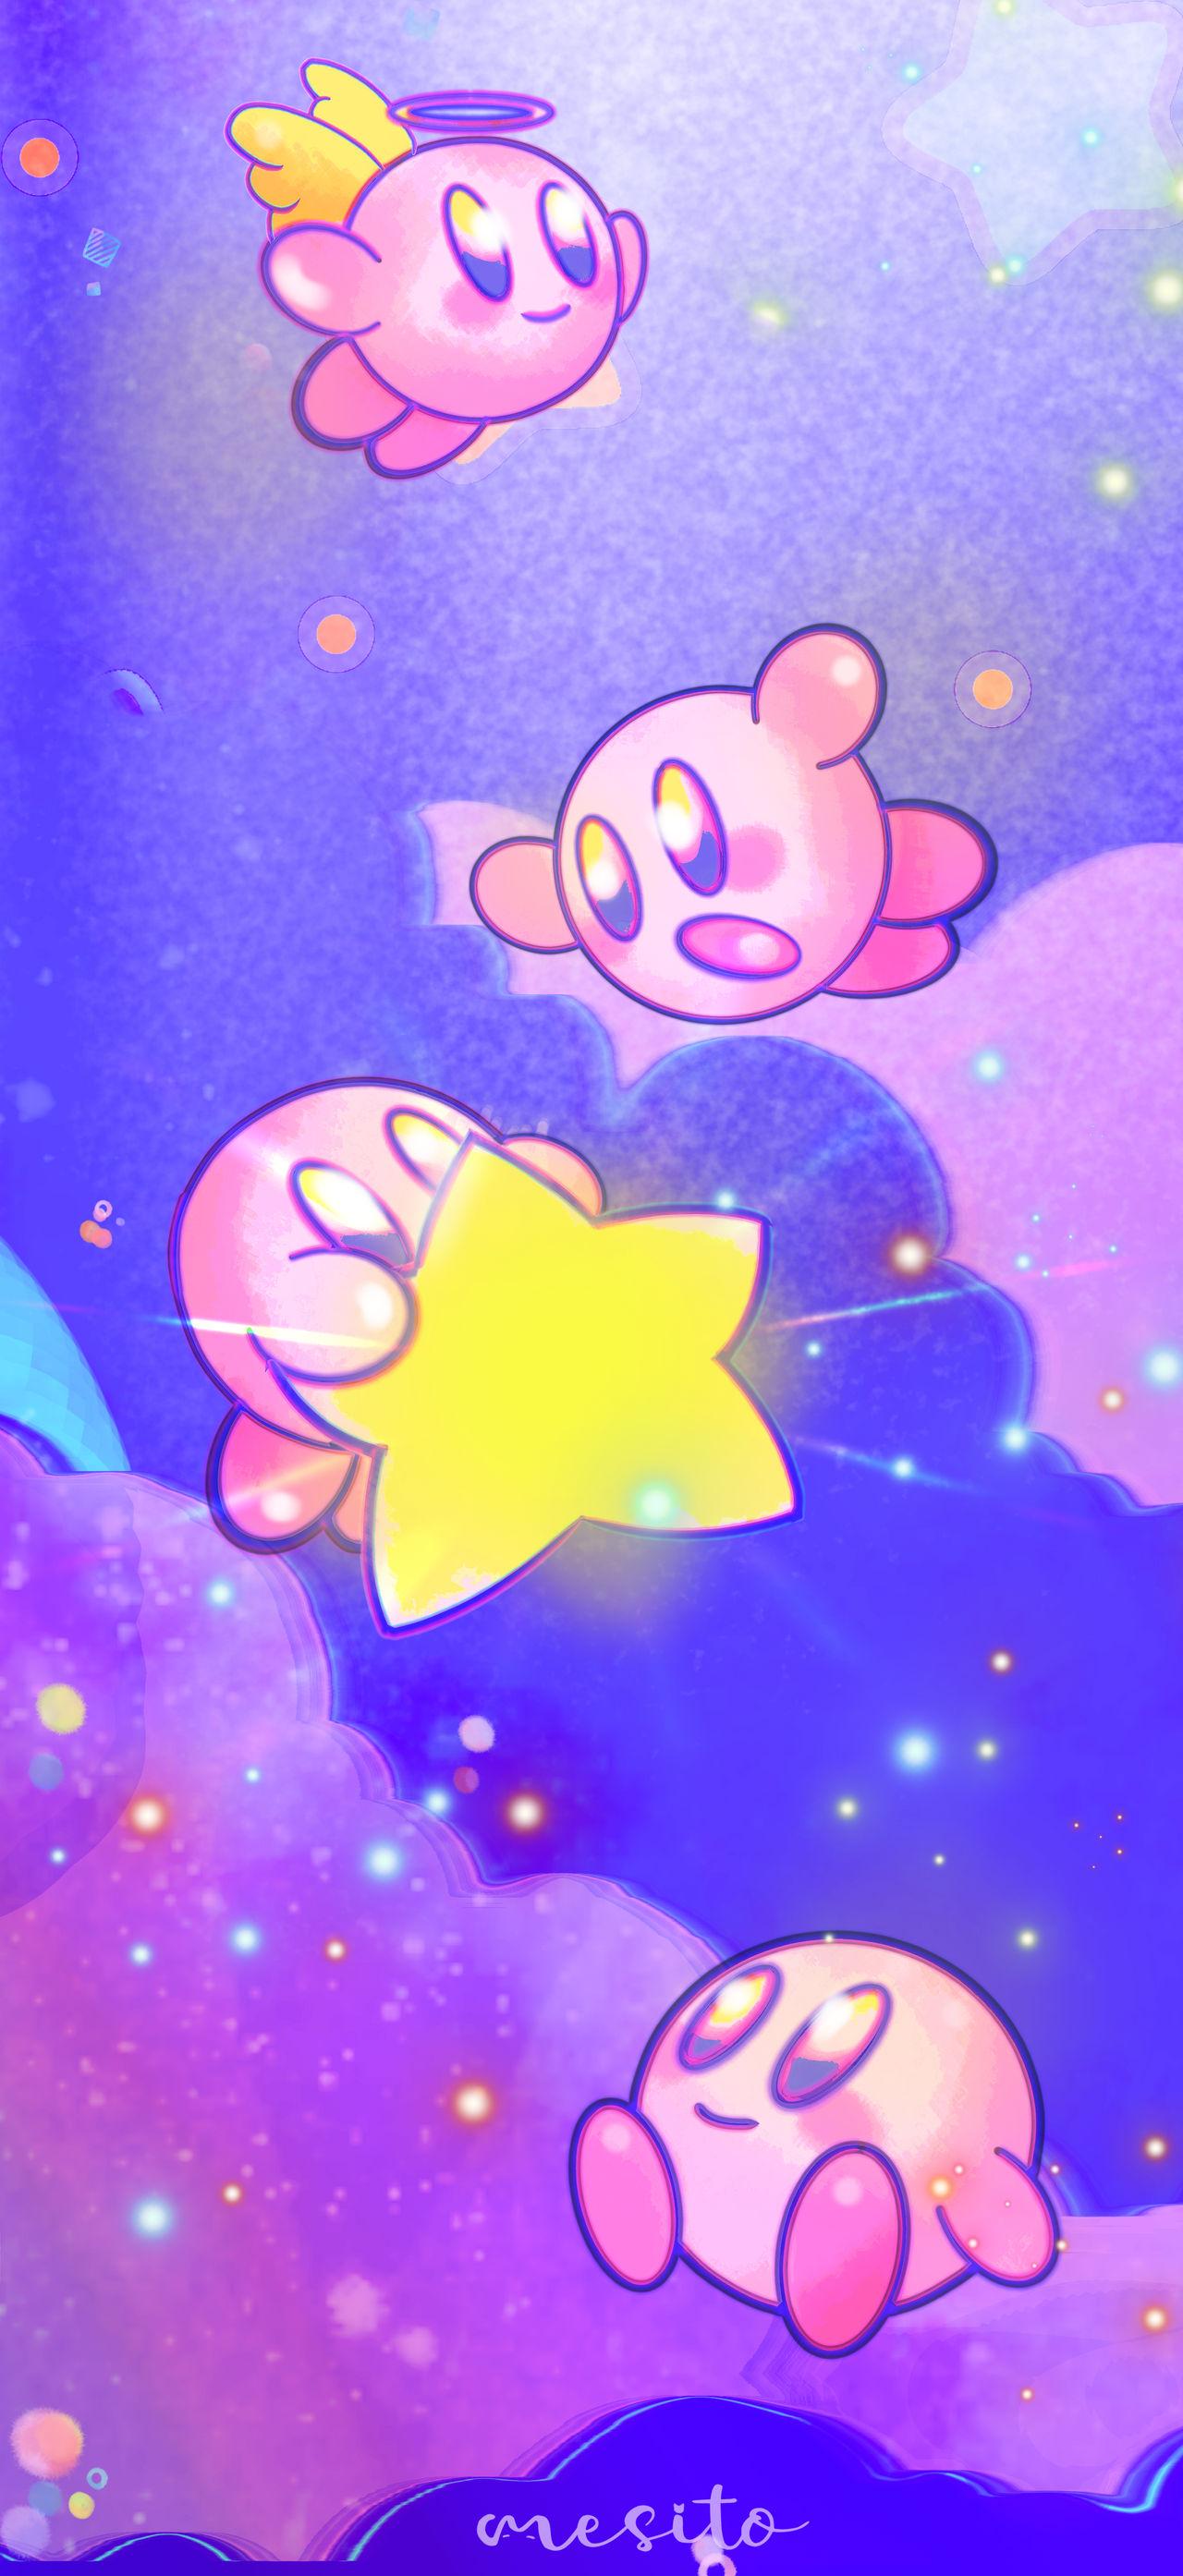 Cute Kirby Wallpaper Download kirby wallpaper thirstymagcom